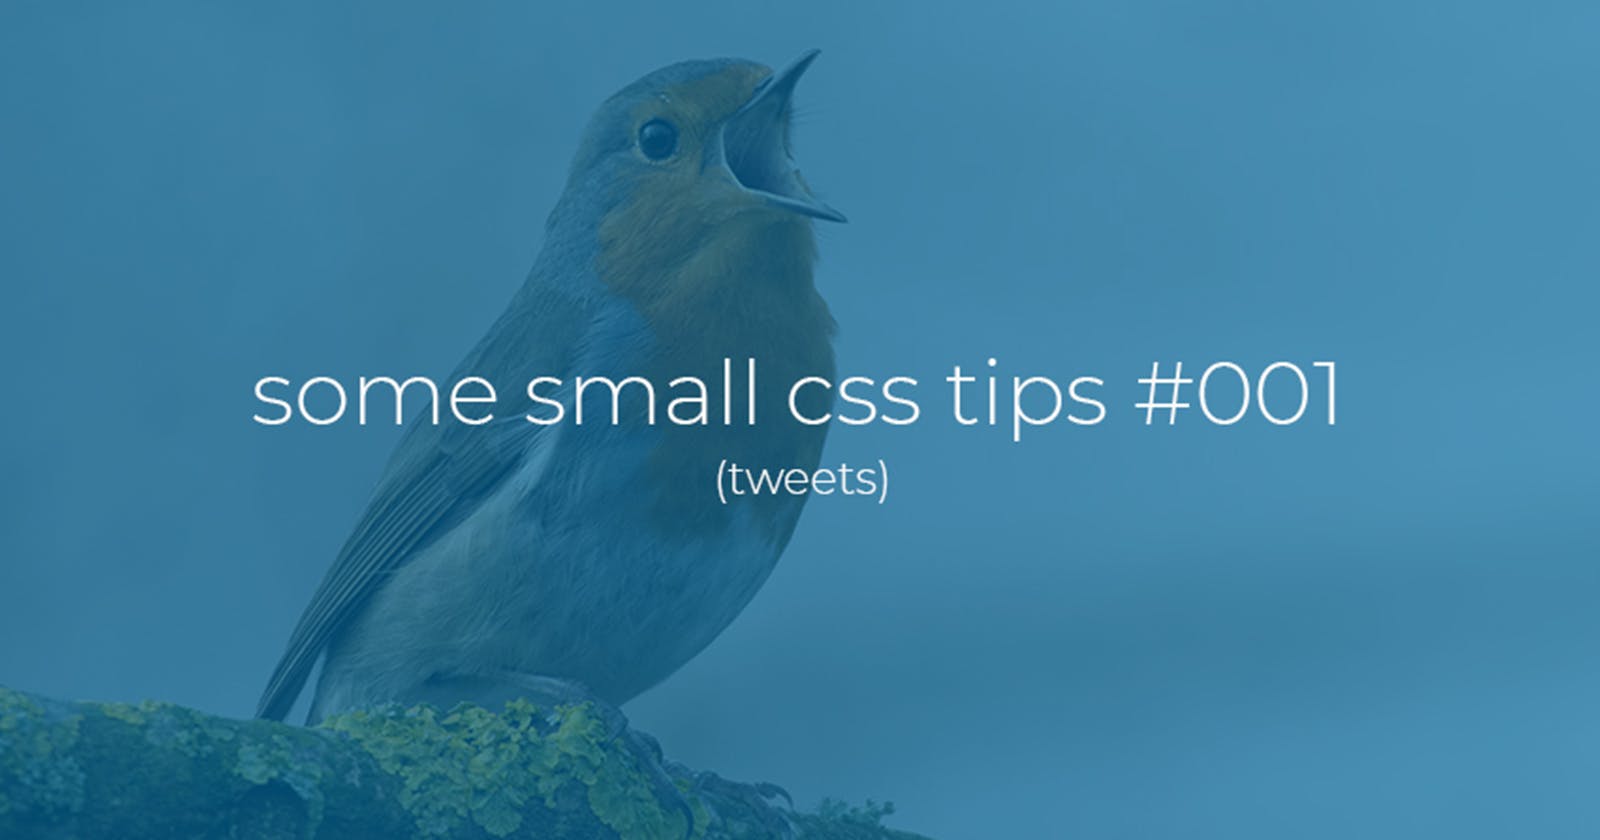 Some small Css tips tweets #001